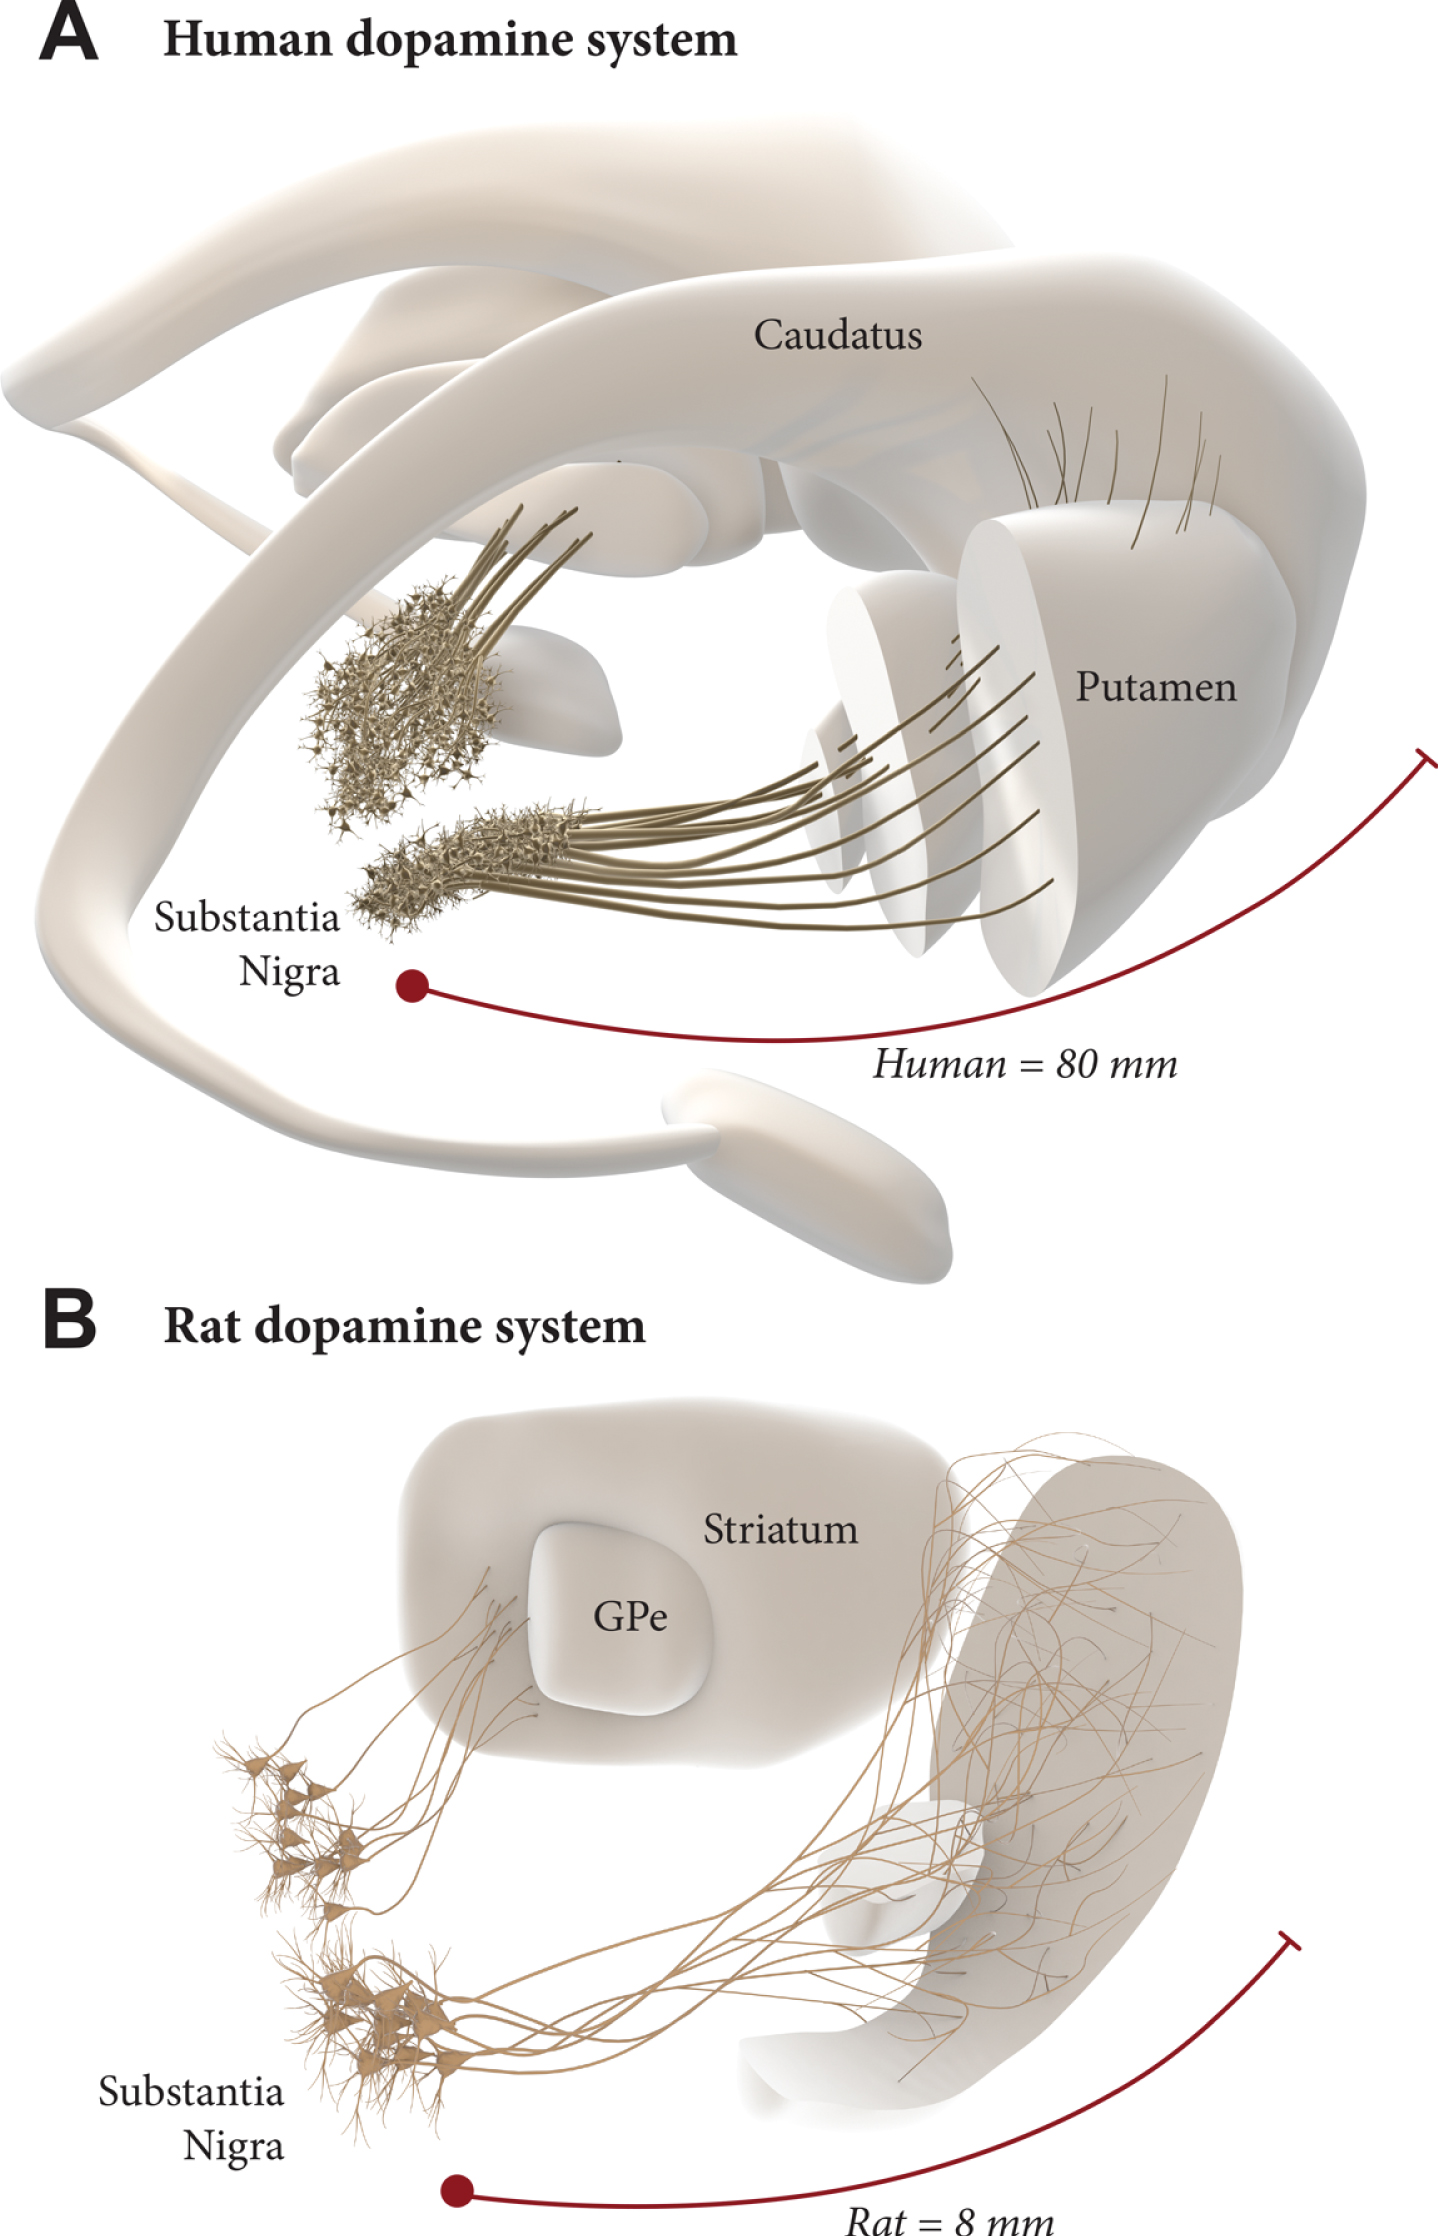 Intranigral grafting is attractive as a way to achieve more complete circuitry repair, more refined functional regulation of the grafted neurons, and more widespread reinnervation of the DA-deficient forebrain areas. The use of this approach in the human brain, however, is a challenge due to the 10-fold greater length of the human DA system (A), compared to the one in the rat brain (B). This may require a combined therapeutic approach where growth promoting factors are used to increase the growth capacity of the grafted mDA neurons.